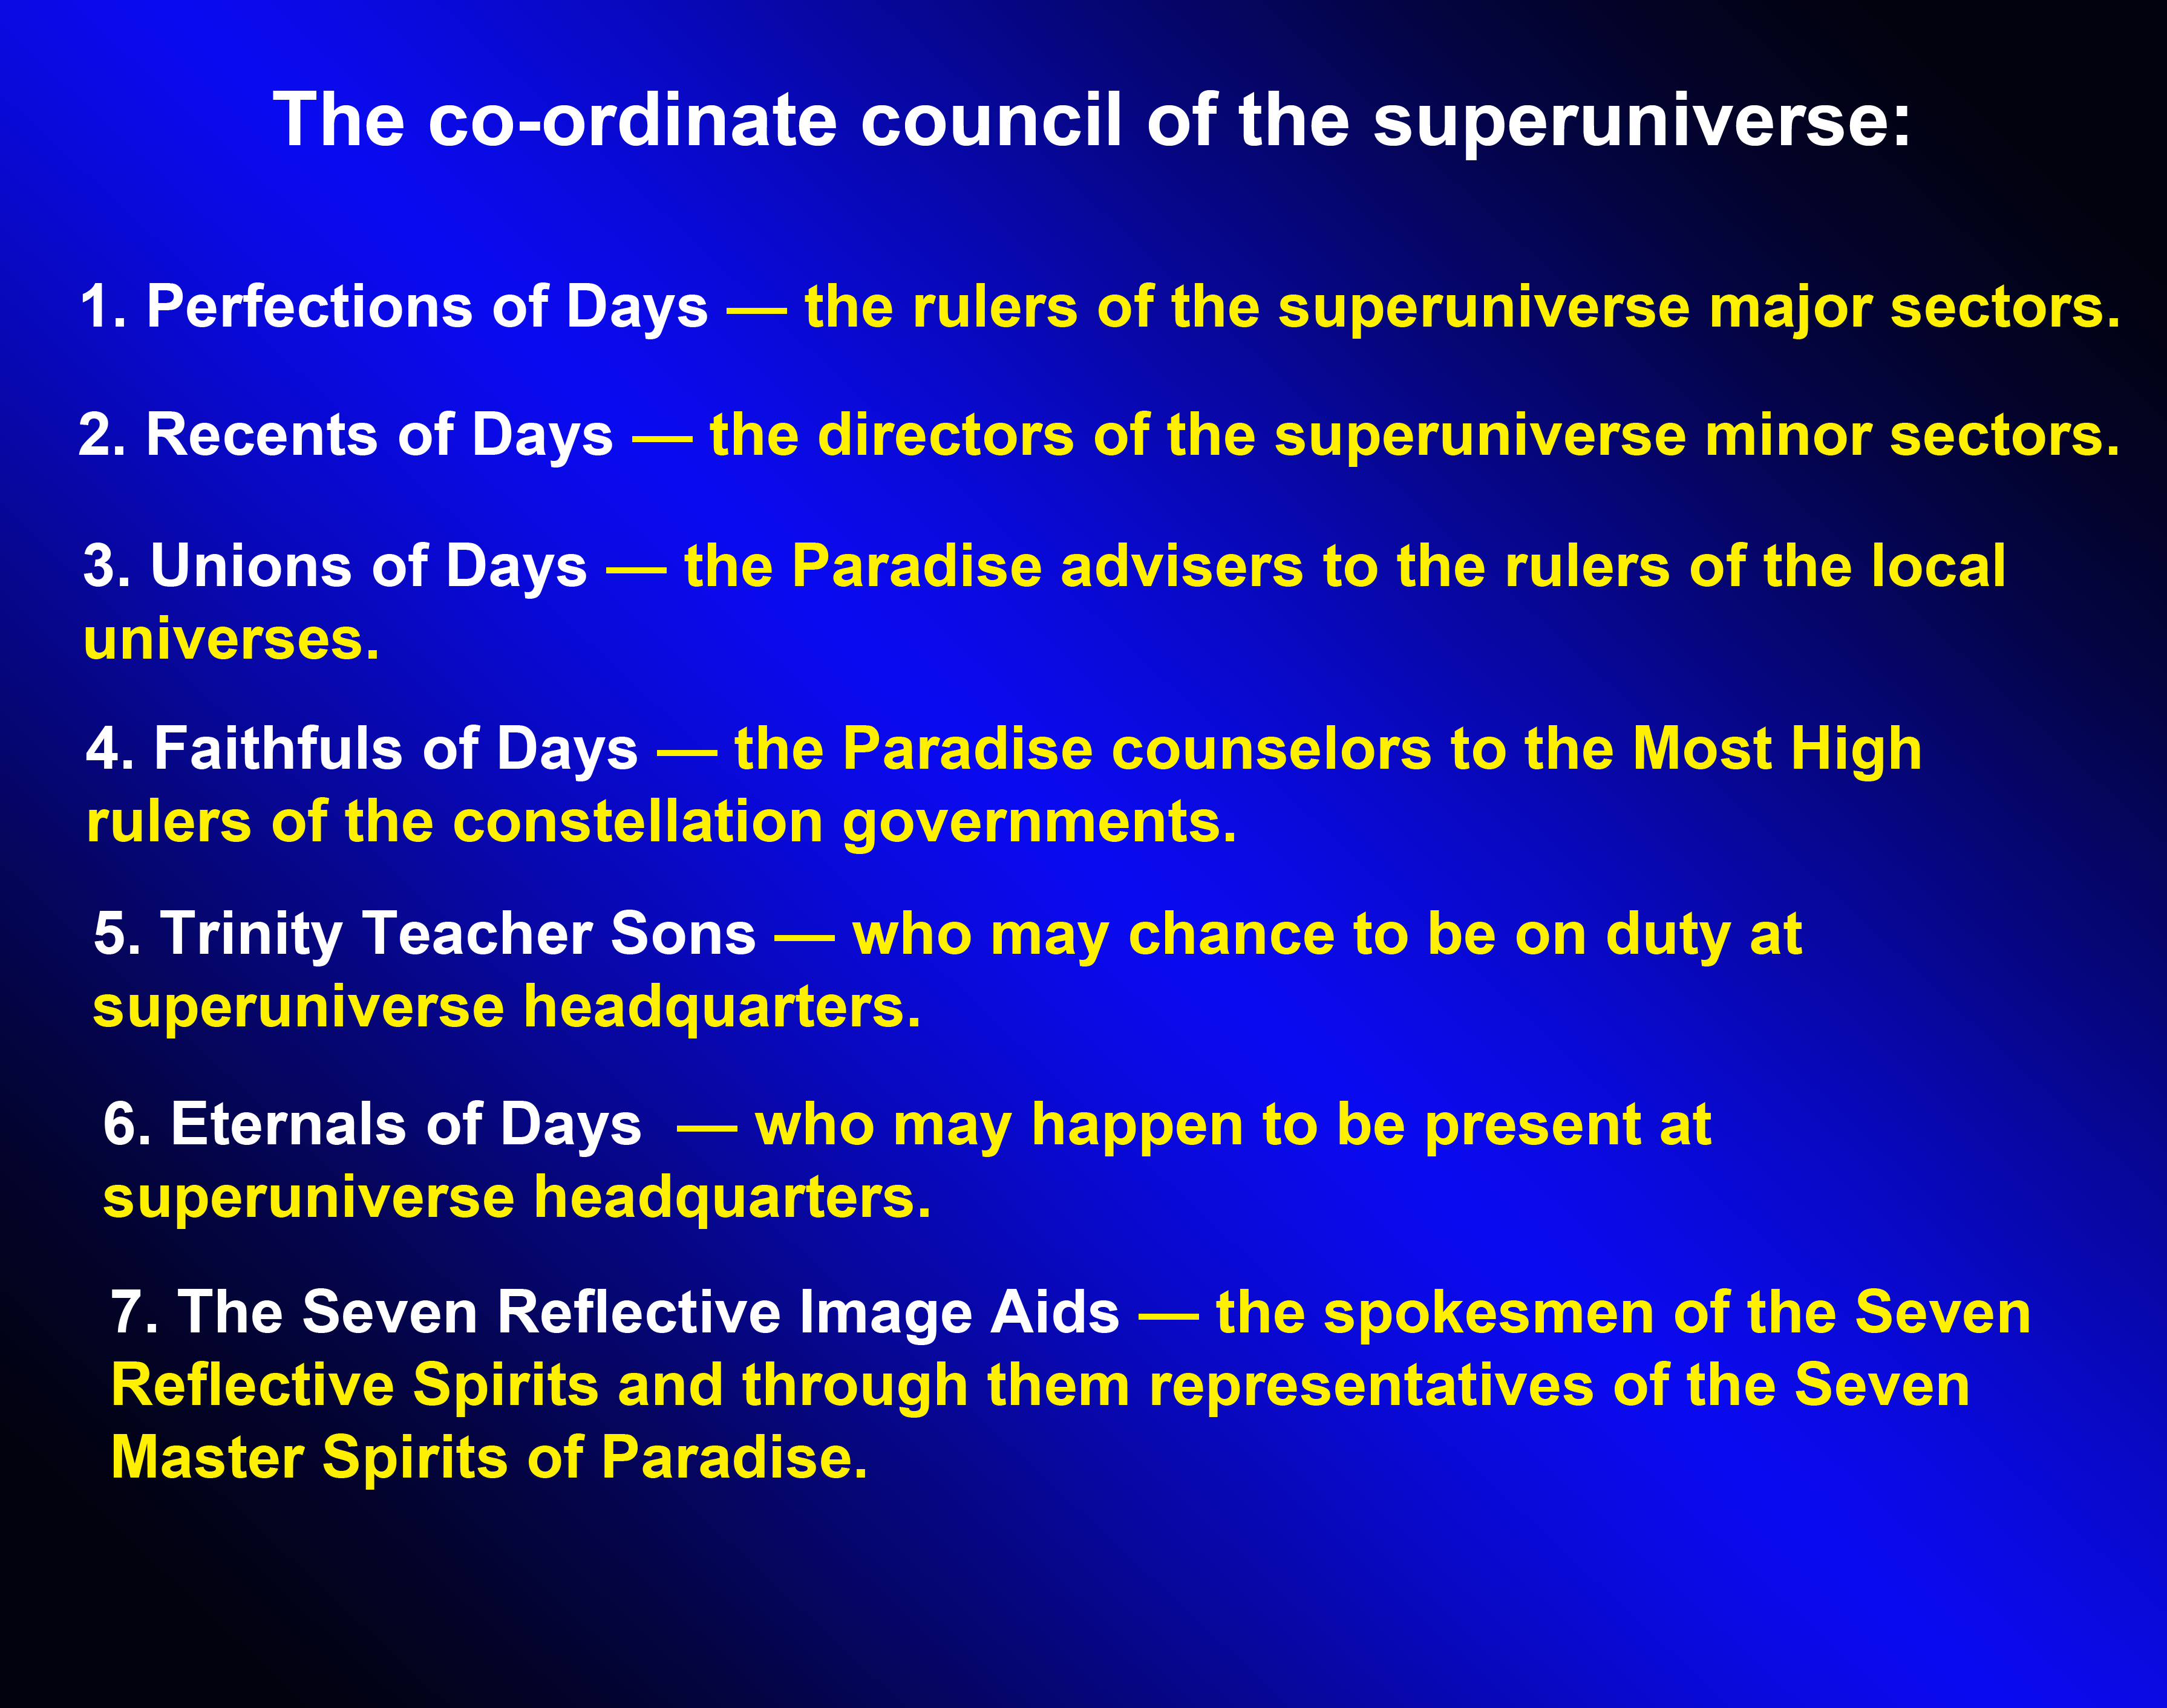 The co-ordinate council of the superuniverse